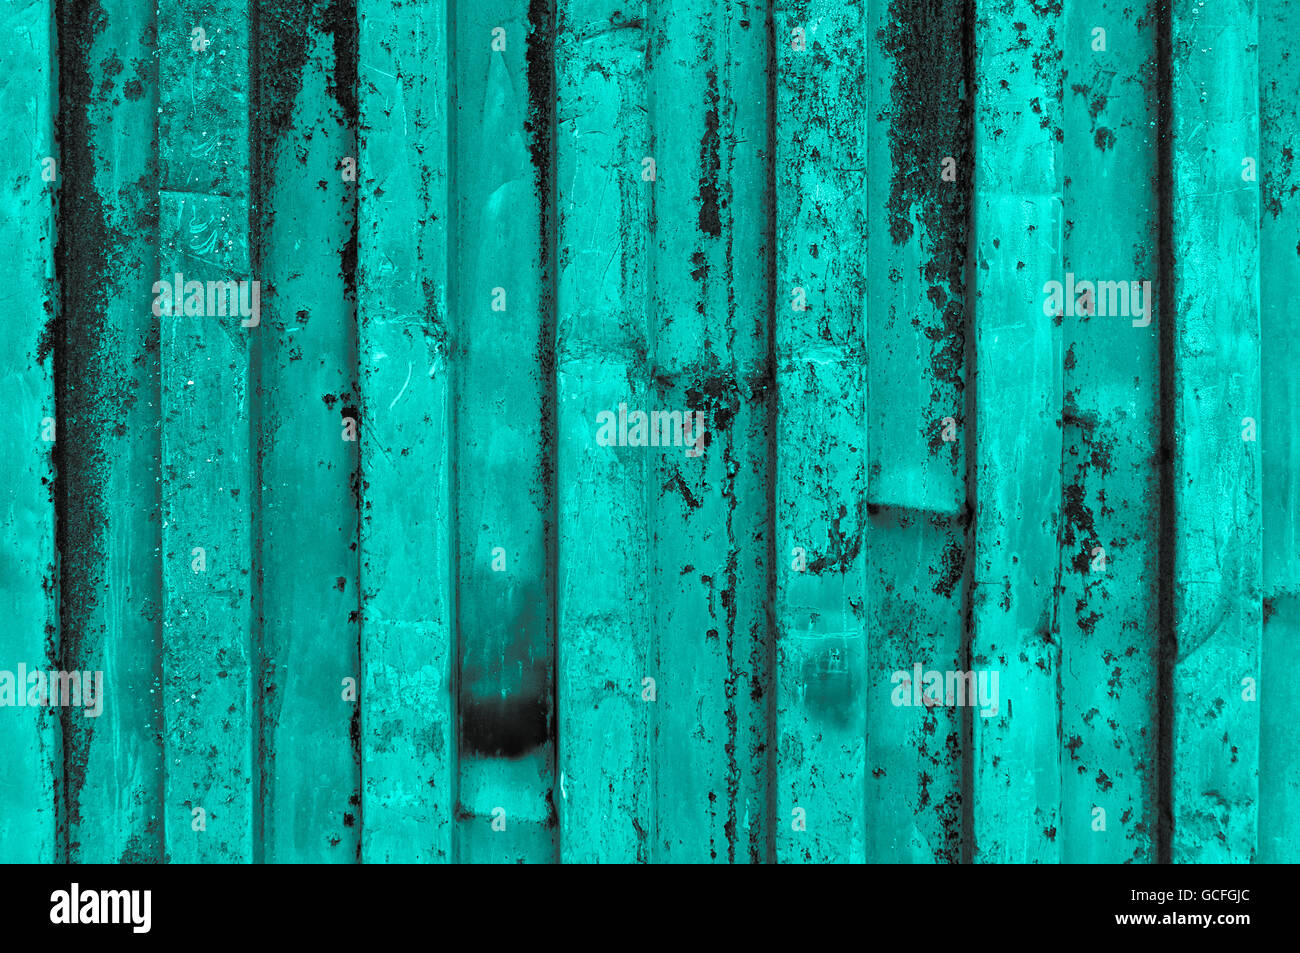 rough and rusty turquoise grayish grayscale corrugated iron metal surface close-up Stock Photo